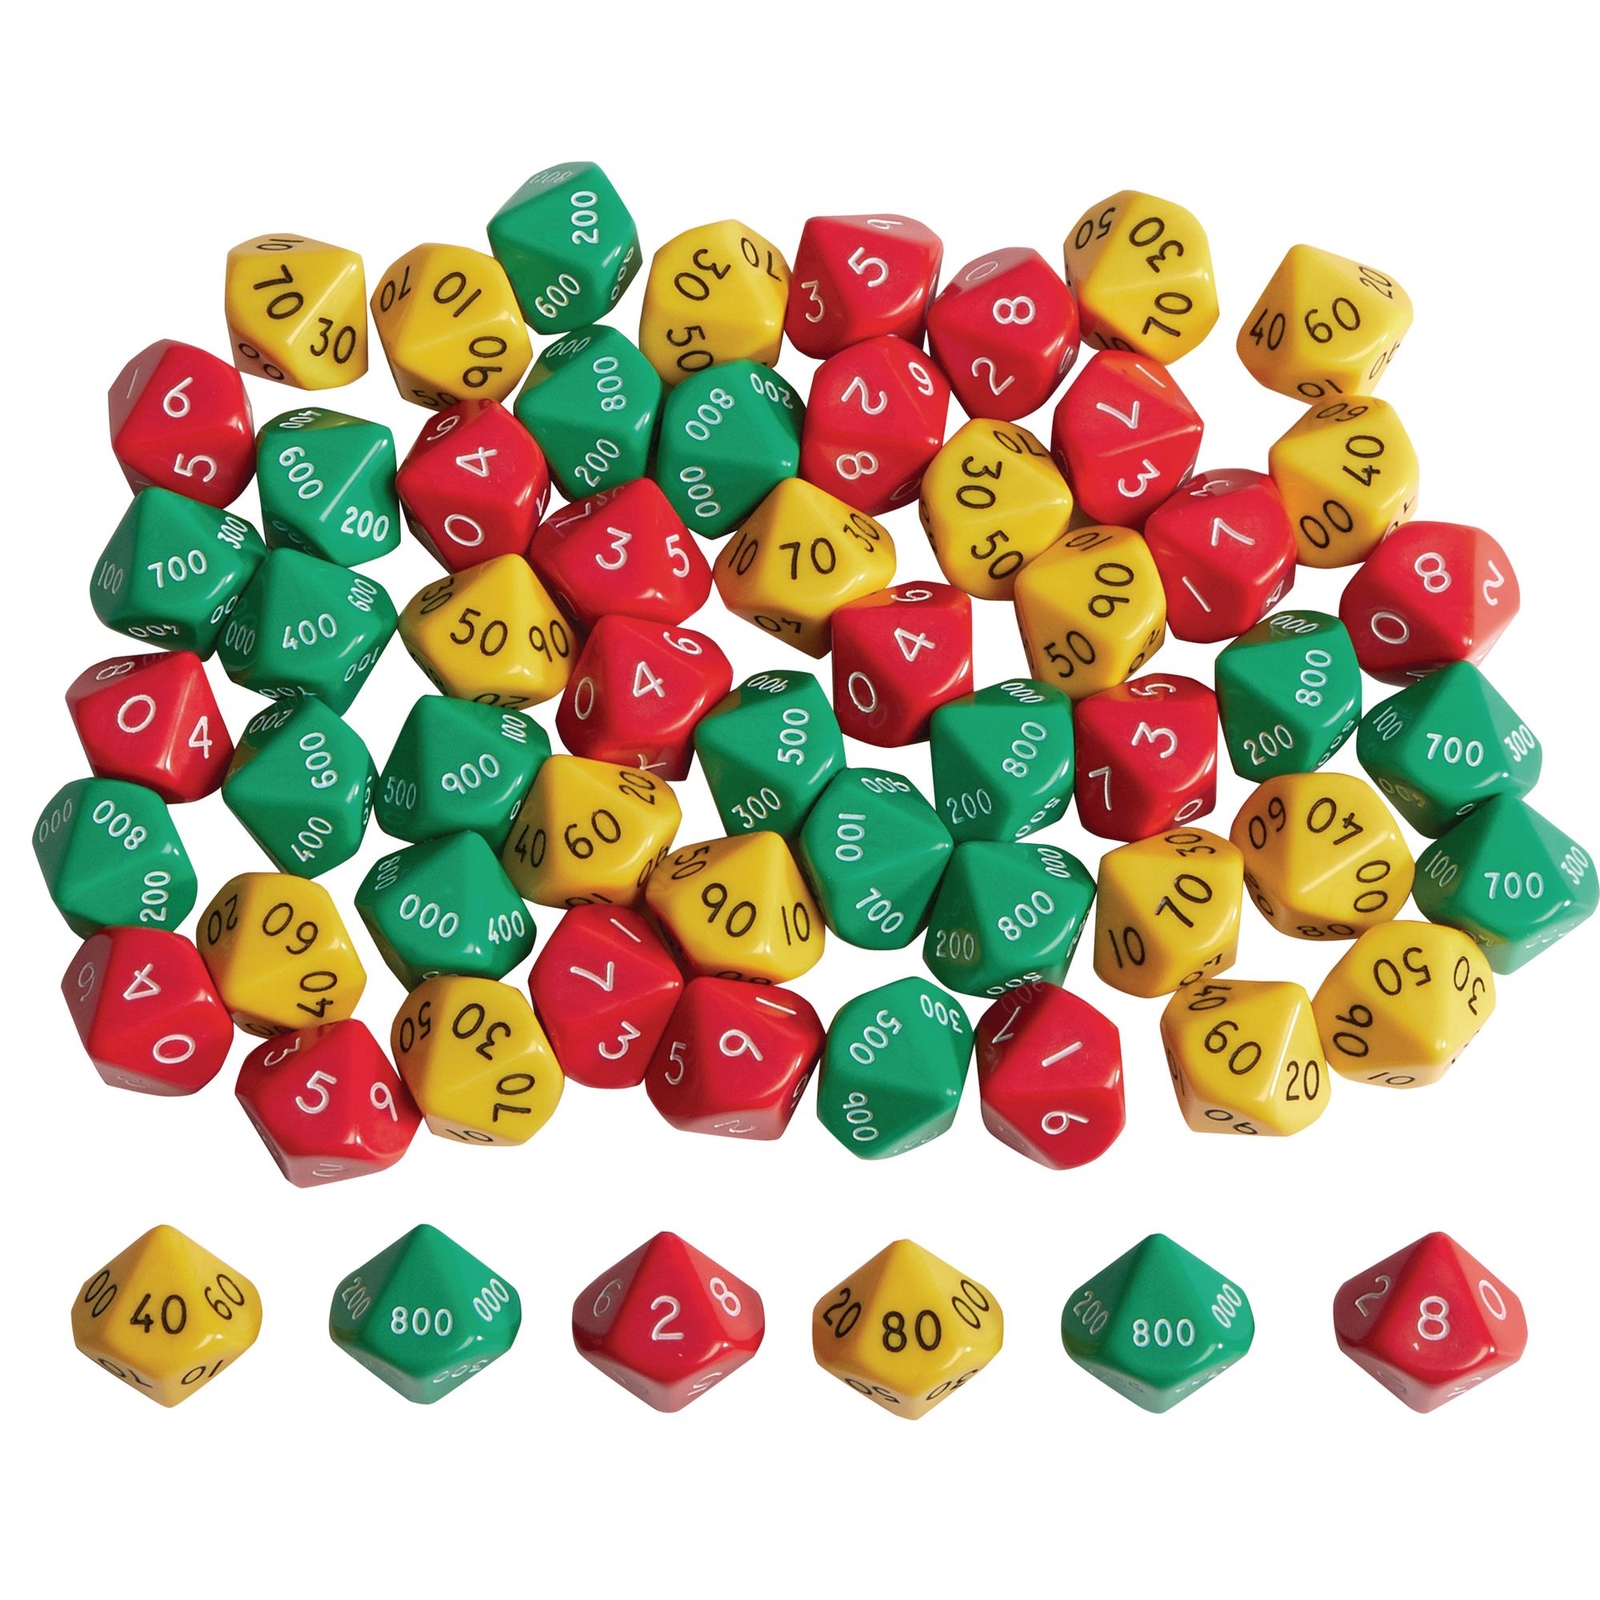 Hundreds Tens & Units Dice - Pack 60